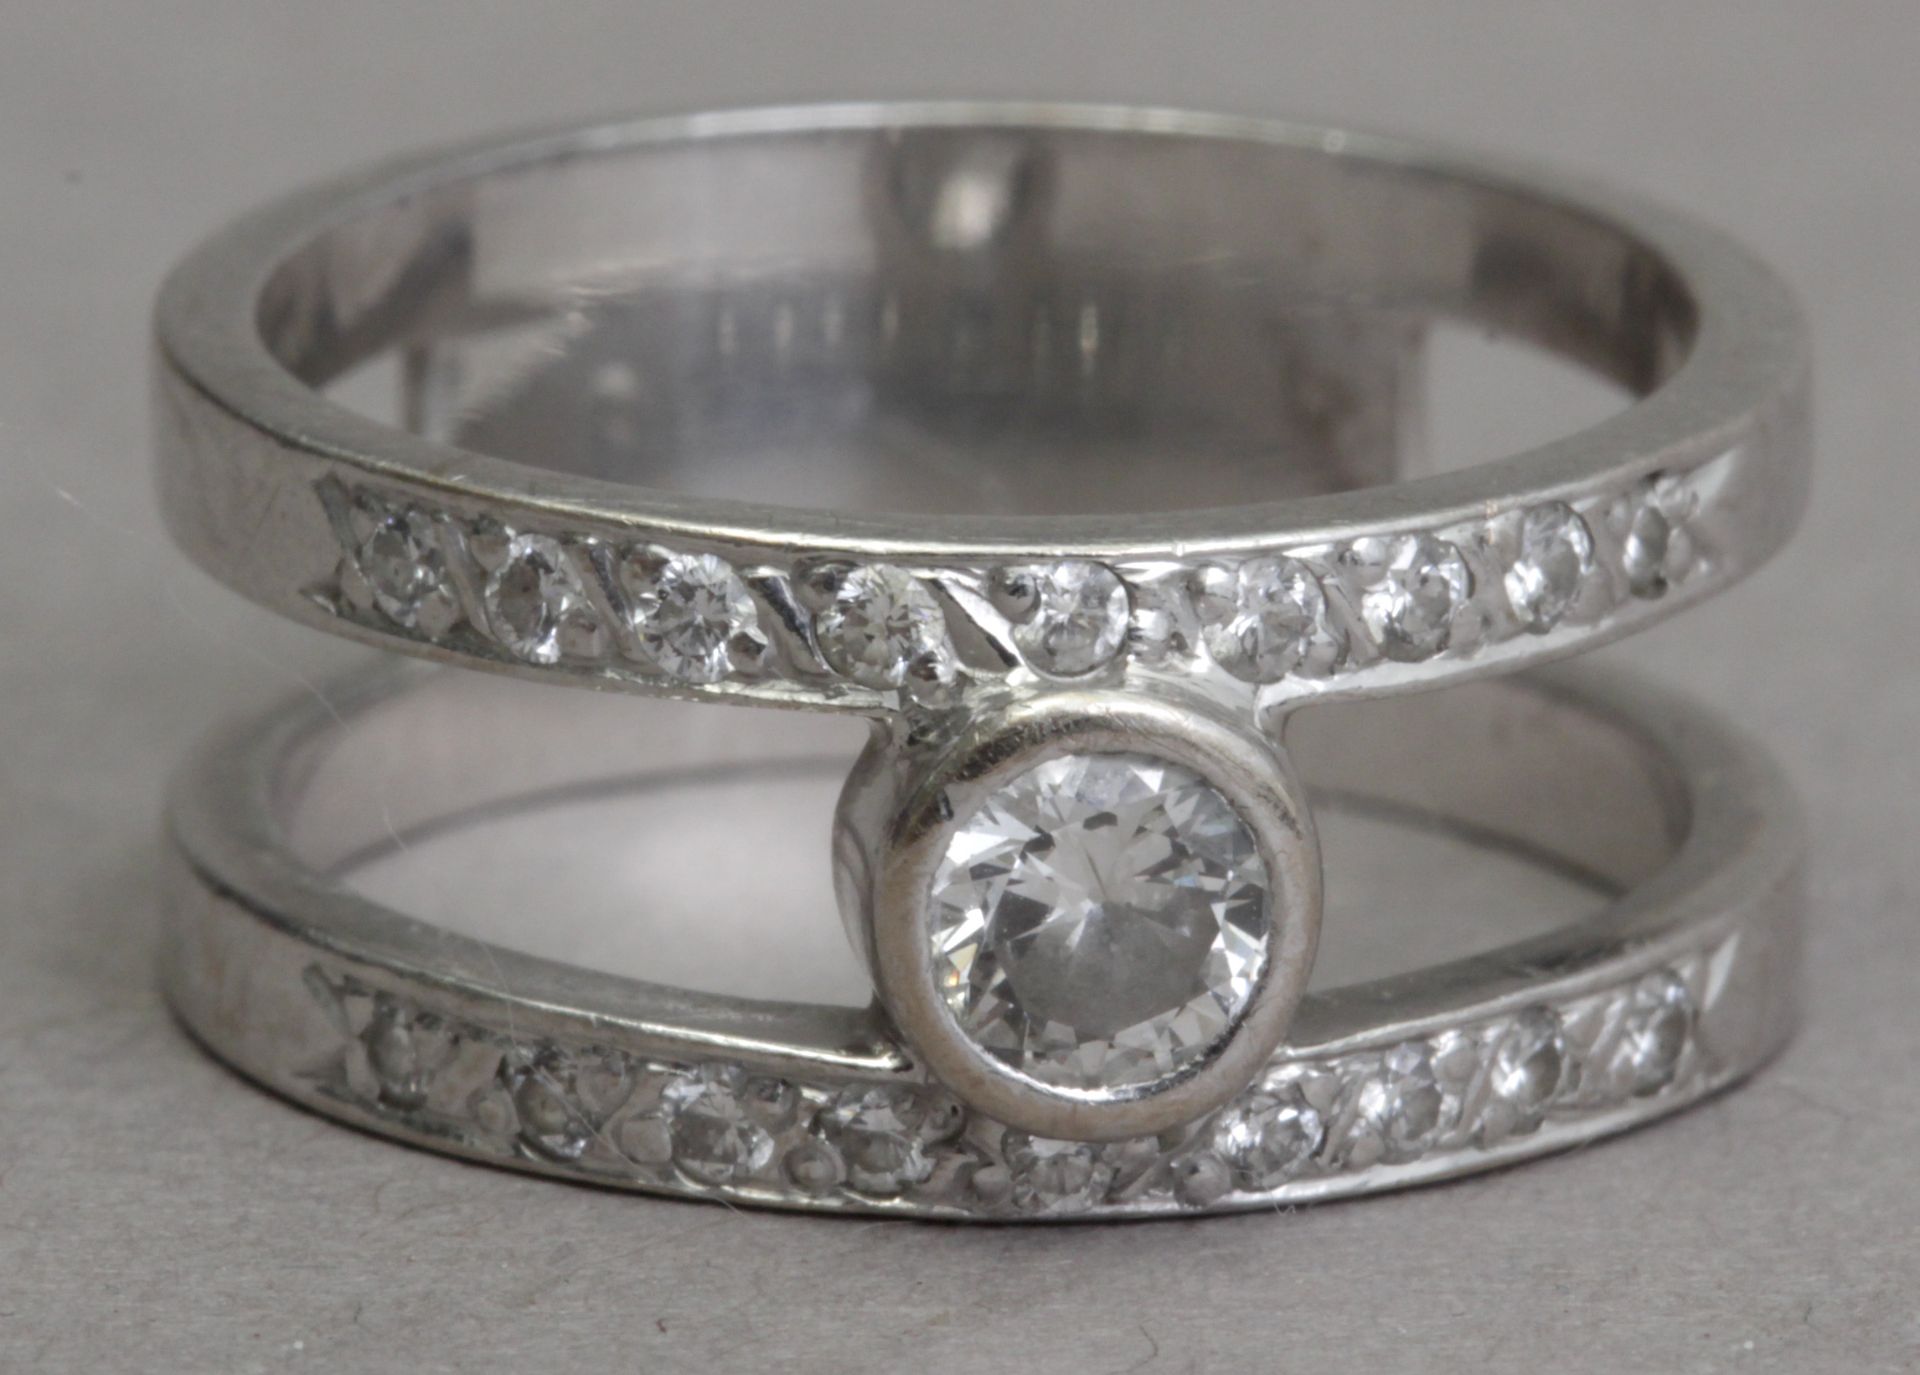 A diamond ring with a white gold setting - Image 3 of 3